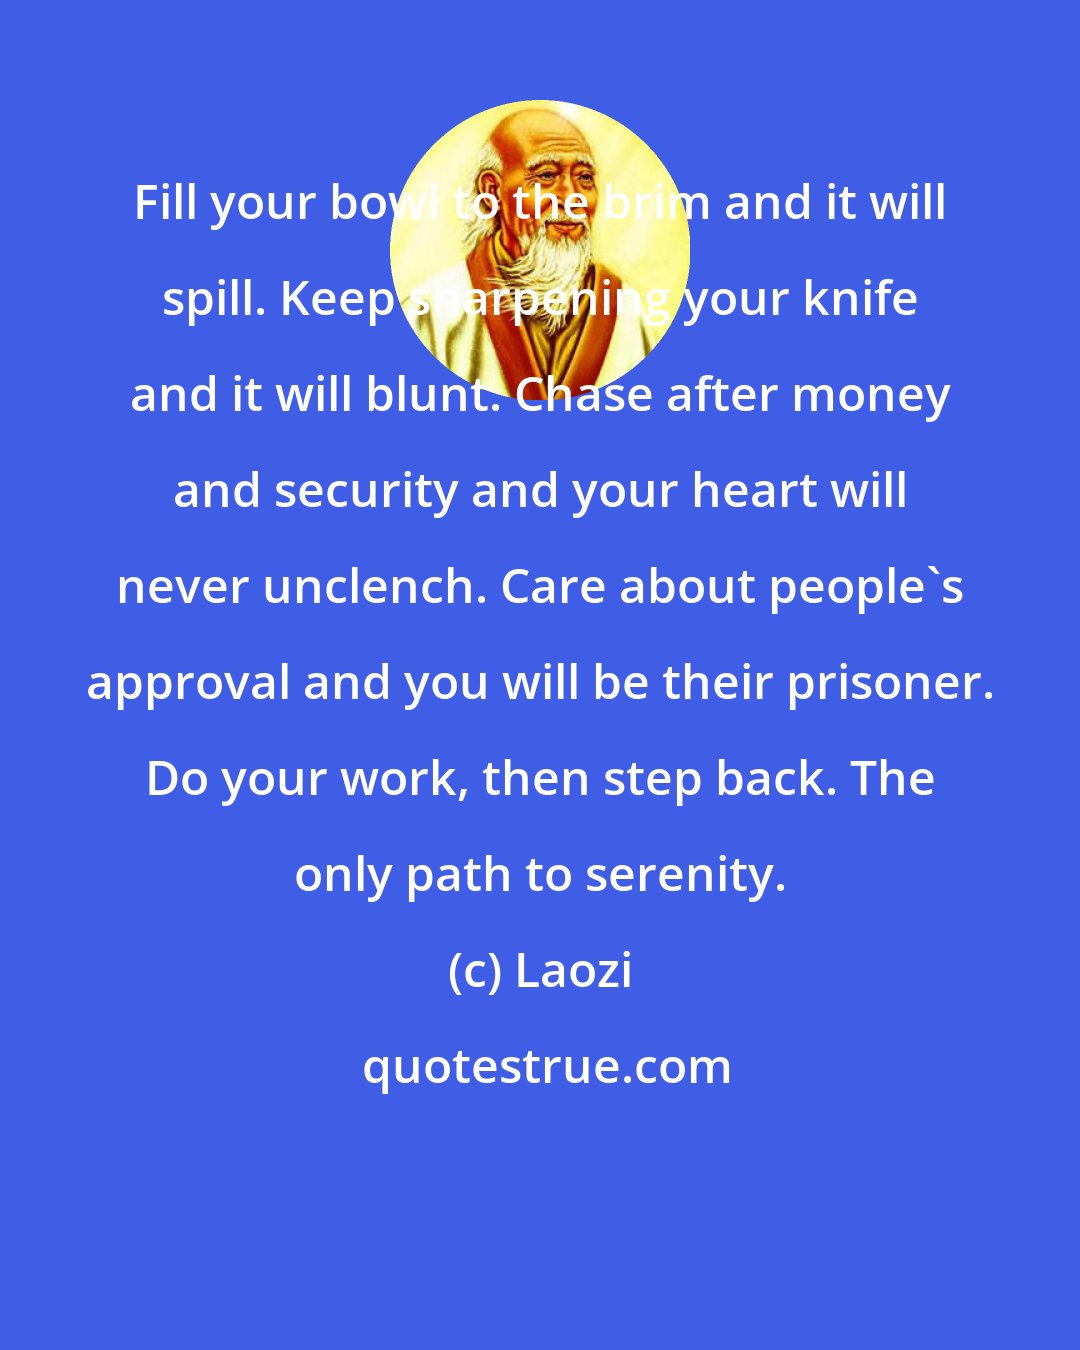 Laozi: Fill your bowl to the brim and it will spill. Keep sharpening your knife and it will blunt. Chase after money and security and your heart will never unclench. Care about people's approval and you will be their prisoner. Do your work, then step back. The only path to serenity.